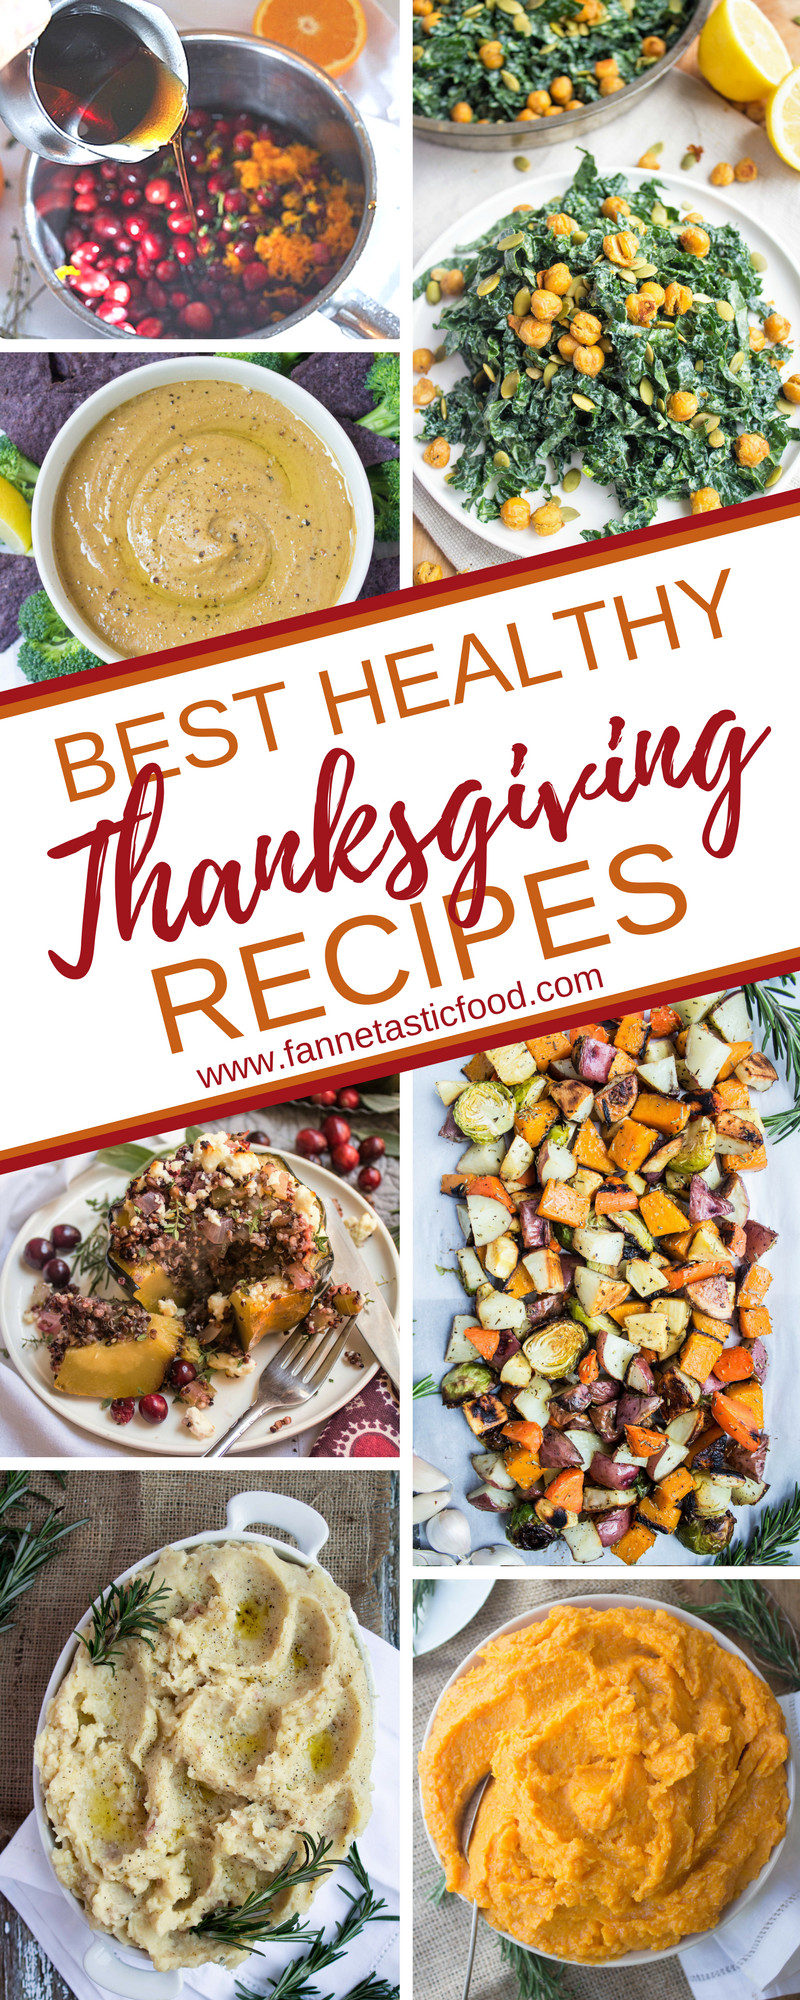 Healthy Thanksgiving Meals
 Best Healthy Thanksgiving Recipes